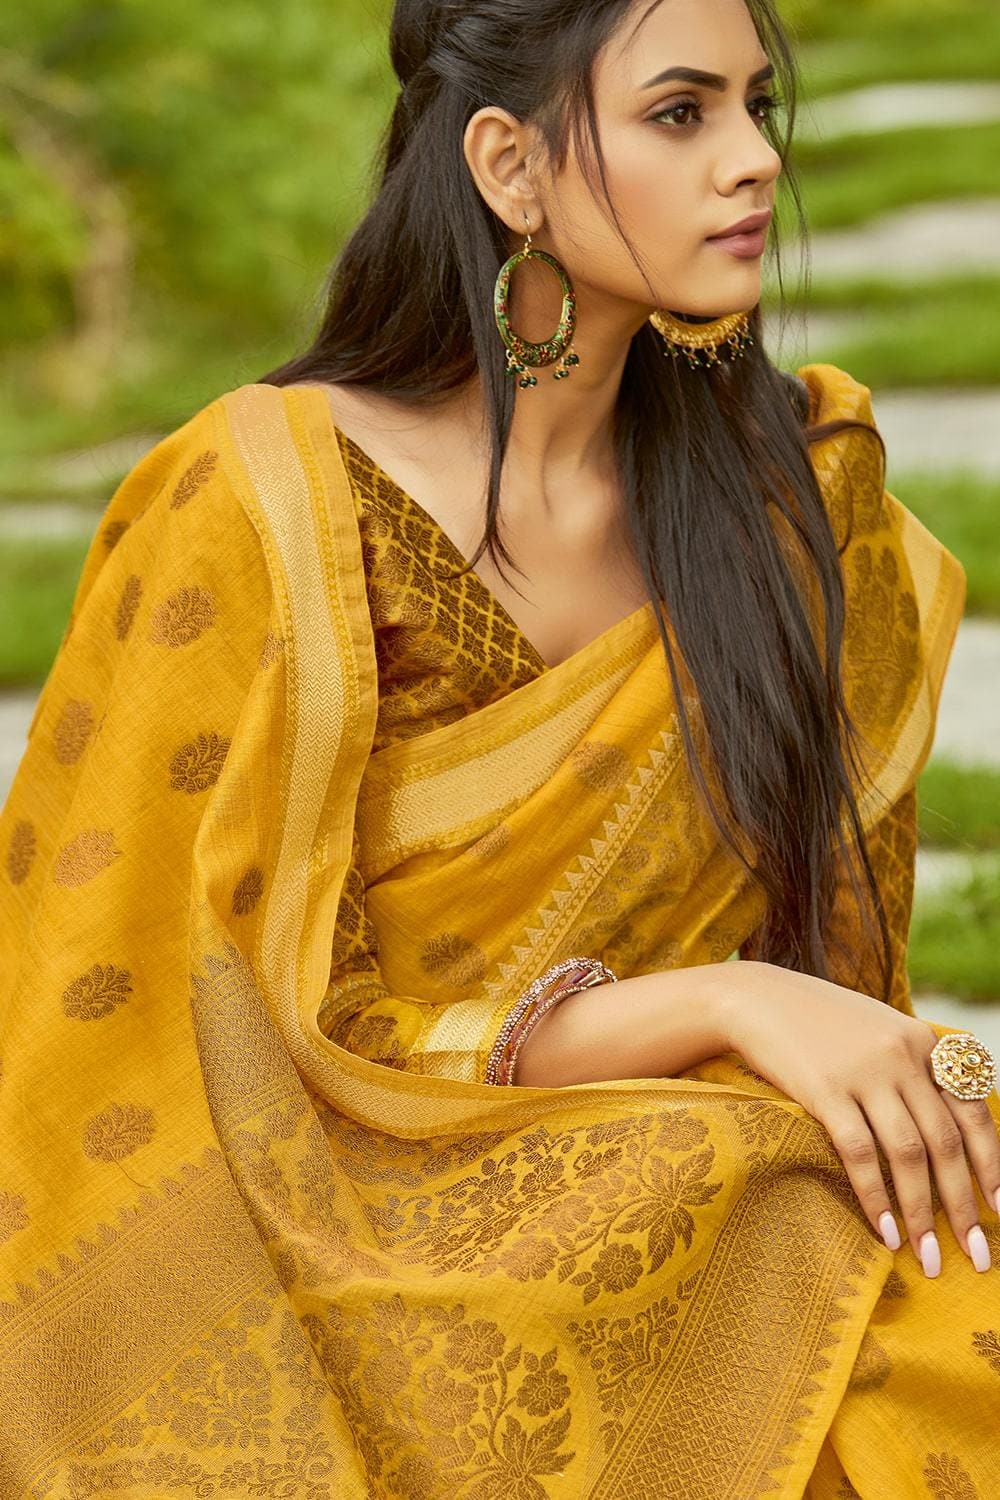 Actresses who stunned in a yellow saree | Times of India